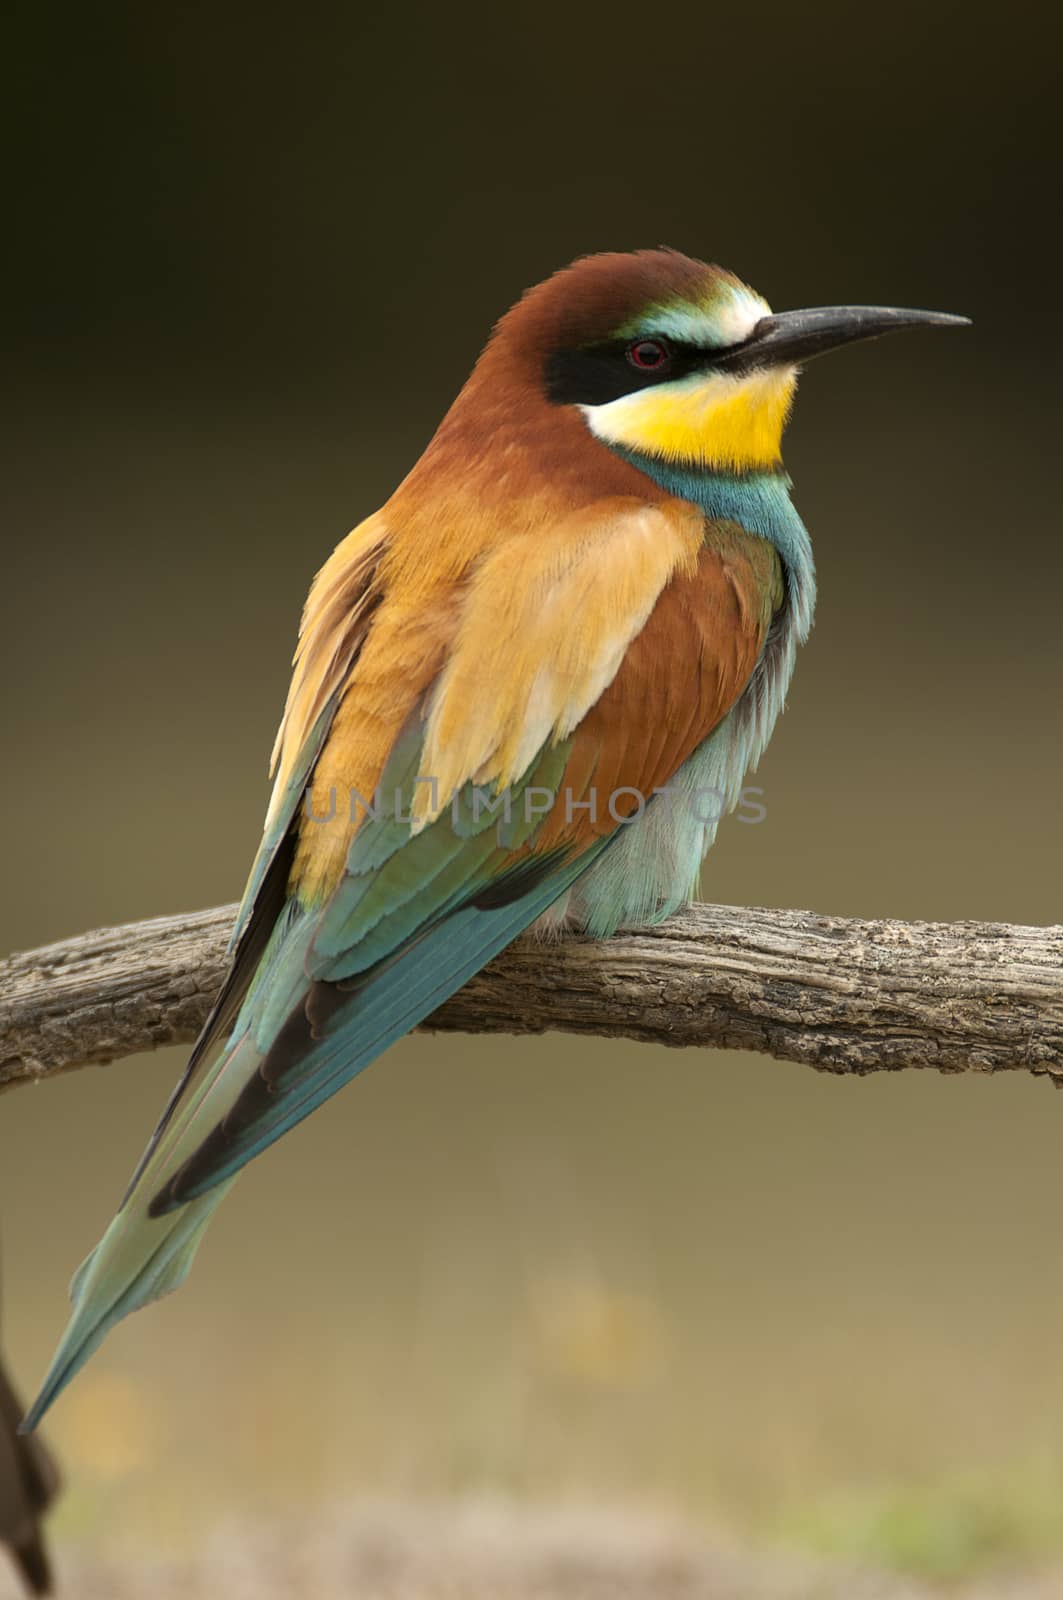 European bee-eater (Merops apiaster), Perched on a branch with a by jalonsohu@gmail.com